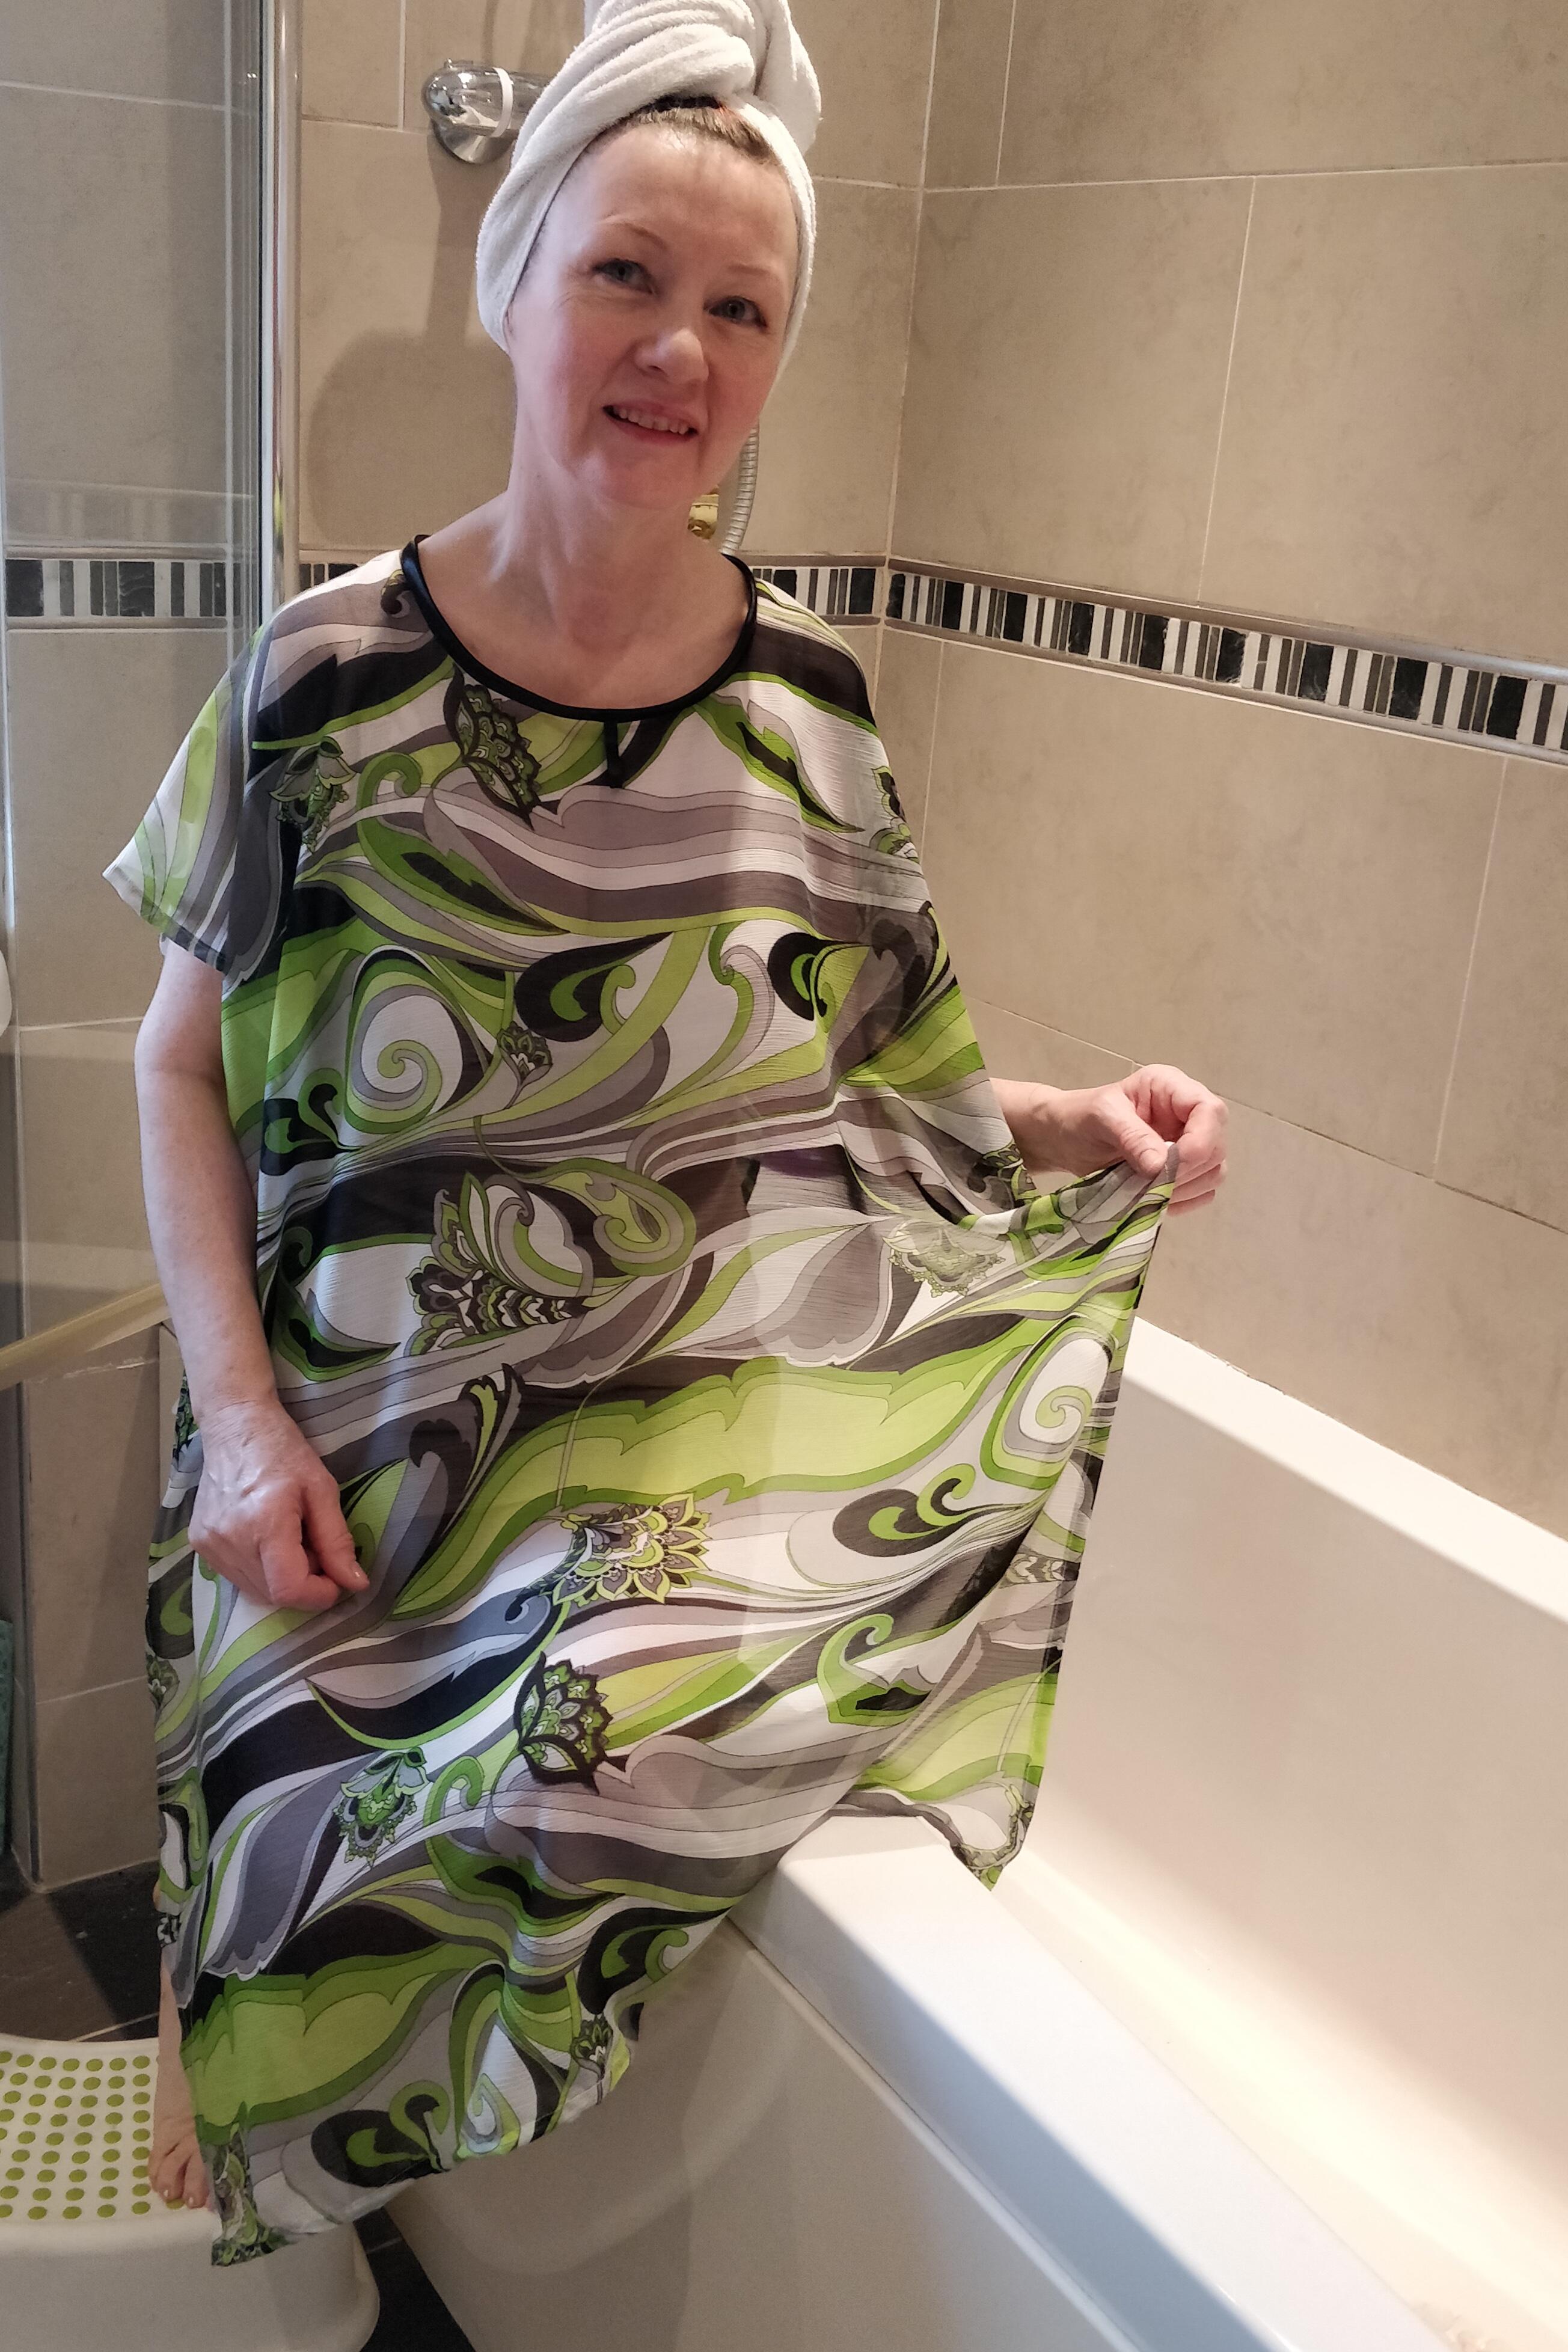 Shower Robe in Lime/Black swirl. The NeverNaked(tm) Shower Drapron® provides modesty, dignity and privacy whilst being helped to shower or bathe. Shower modesty wear. Bathing modesty gown. Lightweight crepe chiffon. Slips over shoulders - No sleeves Magnetic fastening at back